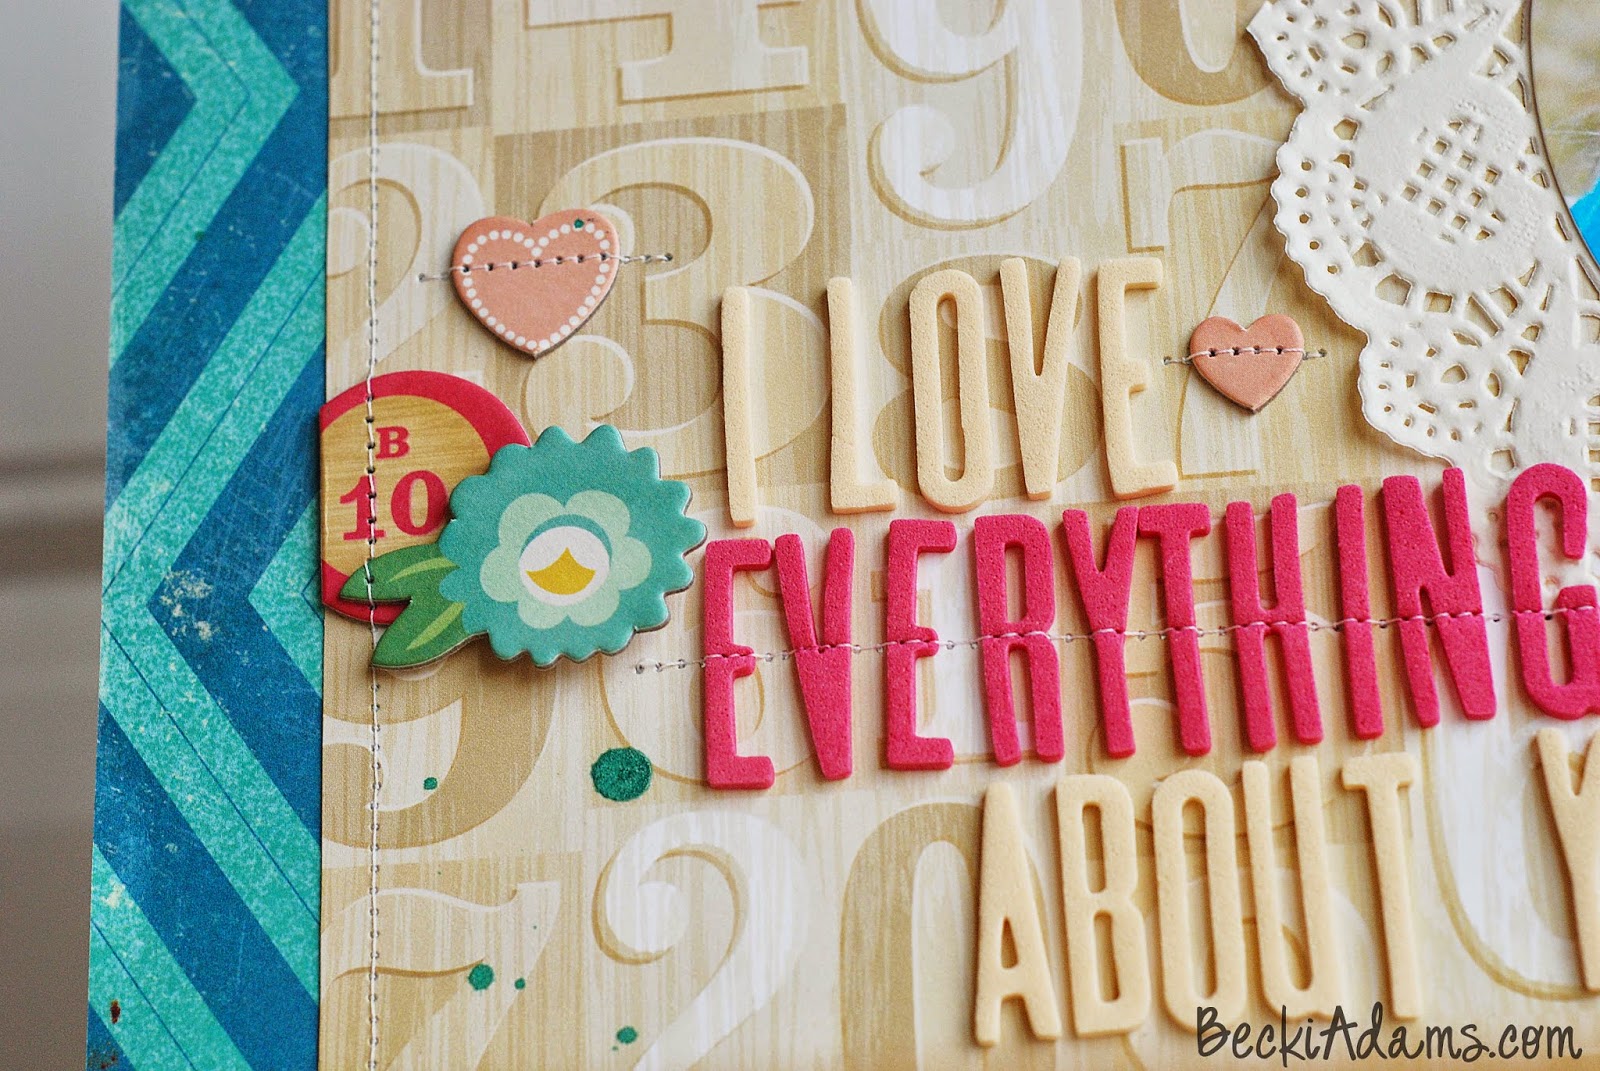 Tips for Scrapbooking with Circles by @jbckadams